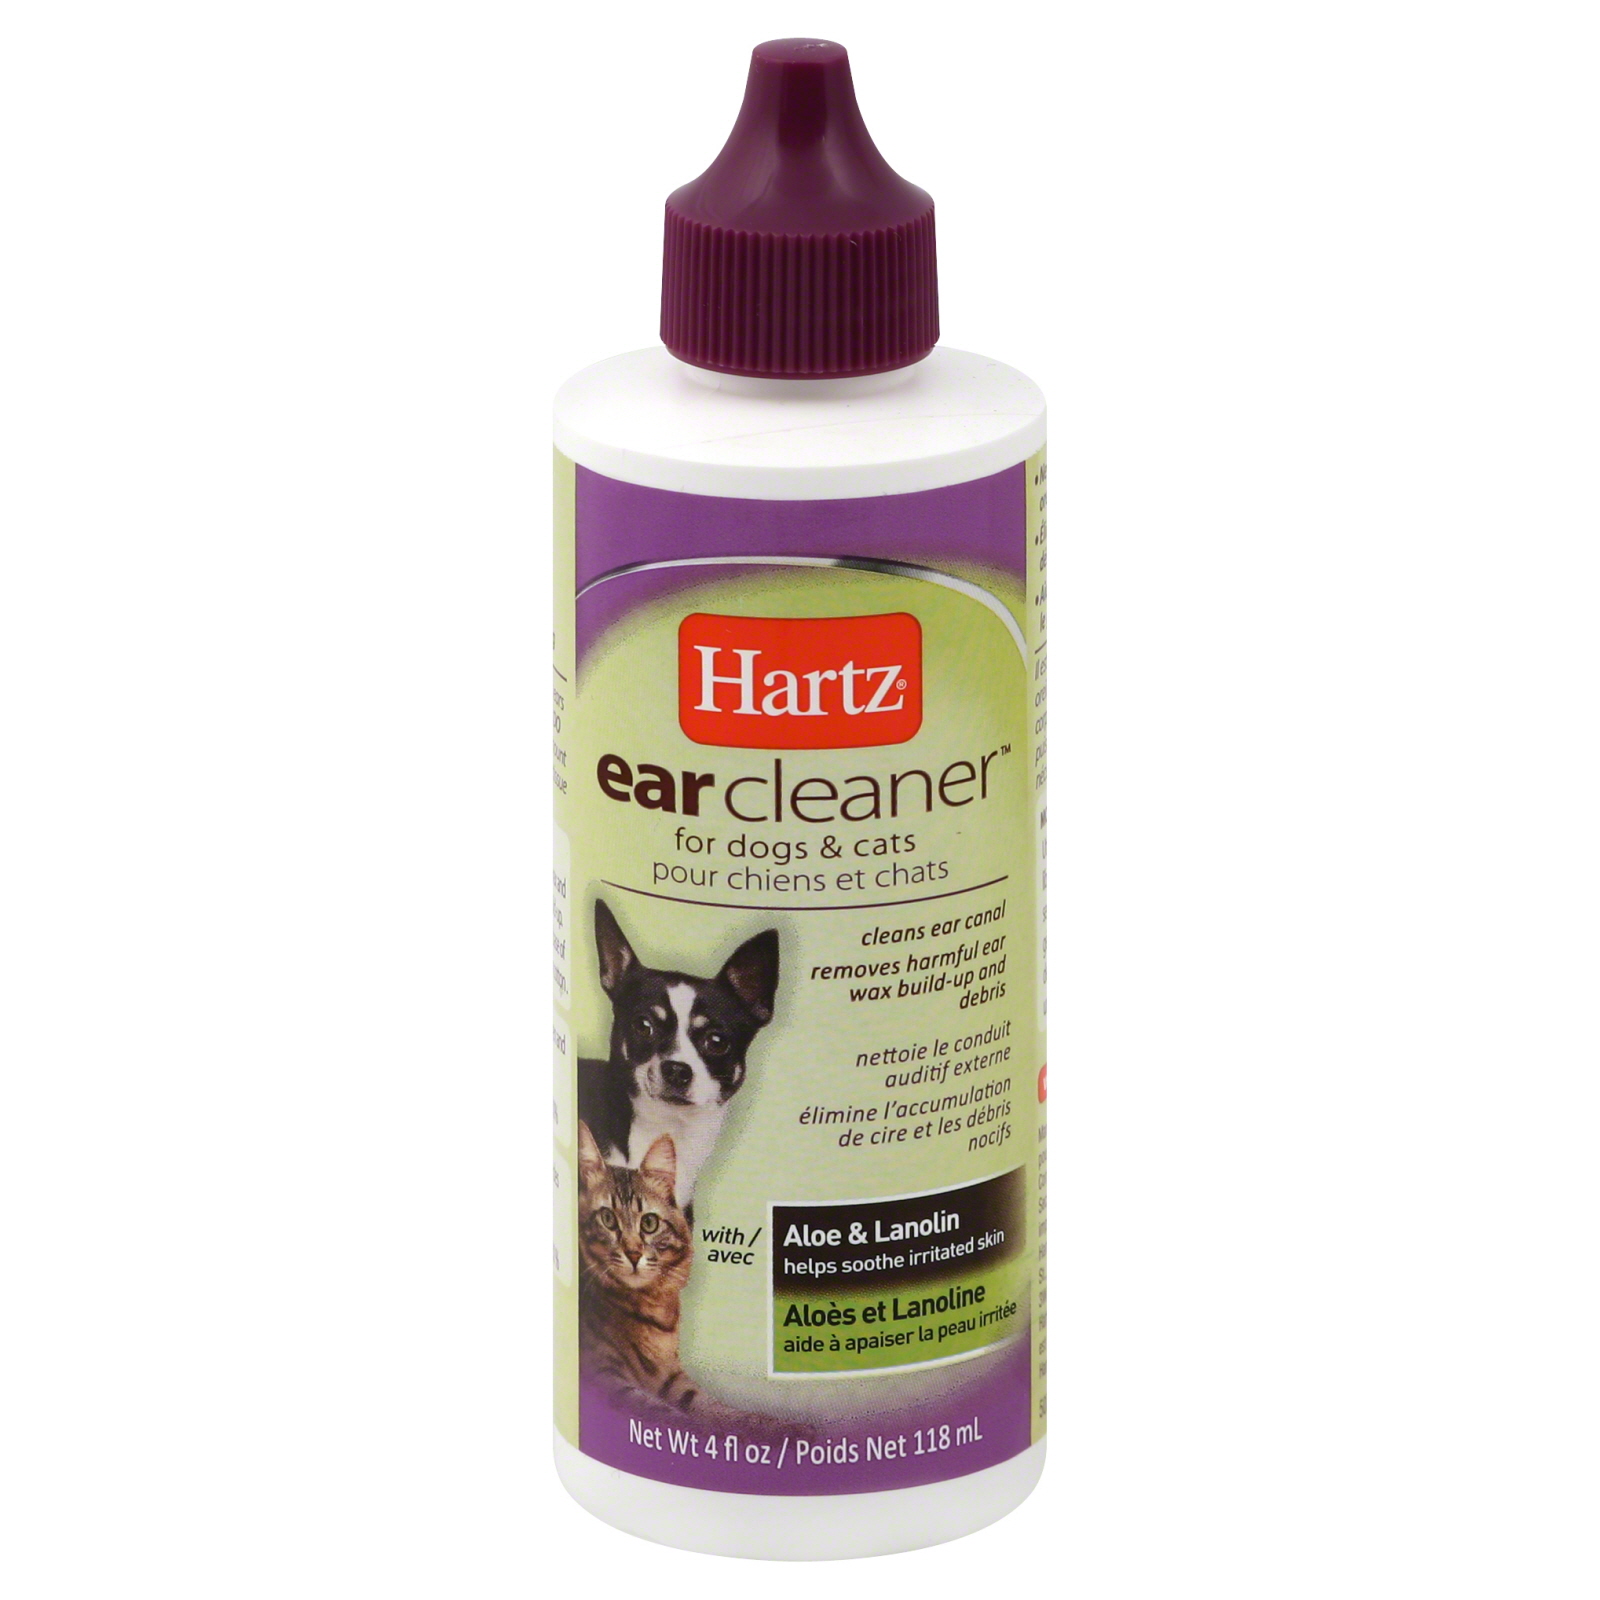 Hartz Advanced Care Ear Cleaner with Aloe & Lanolin, for Dogs & Cats, 4